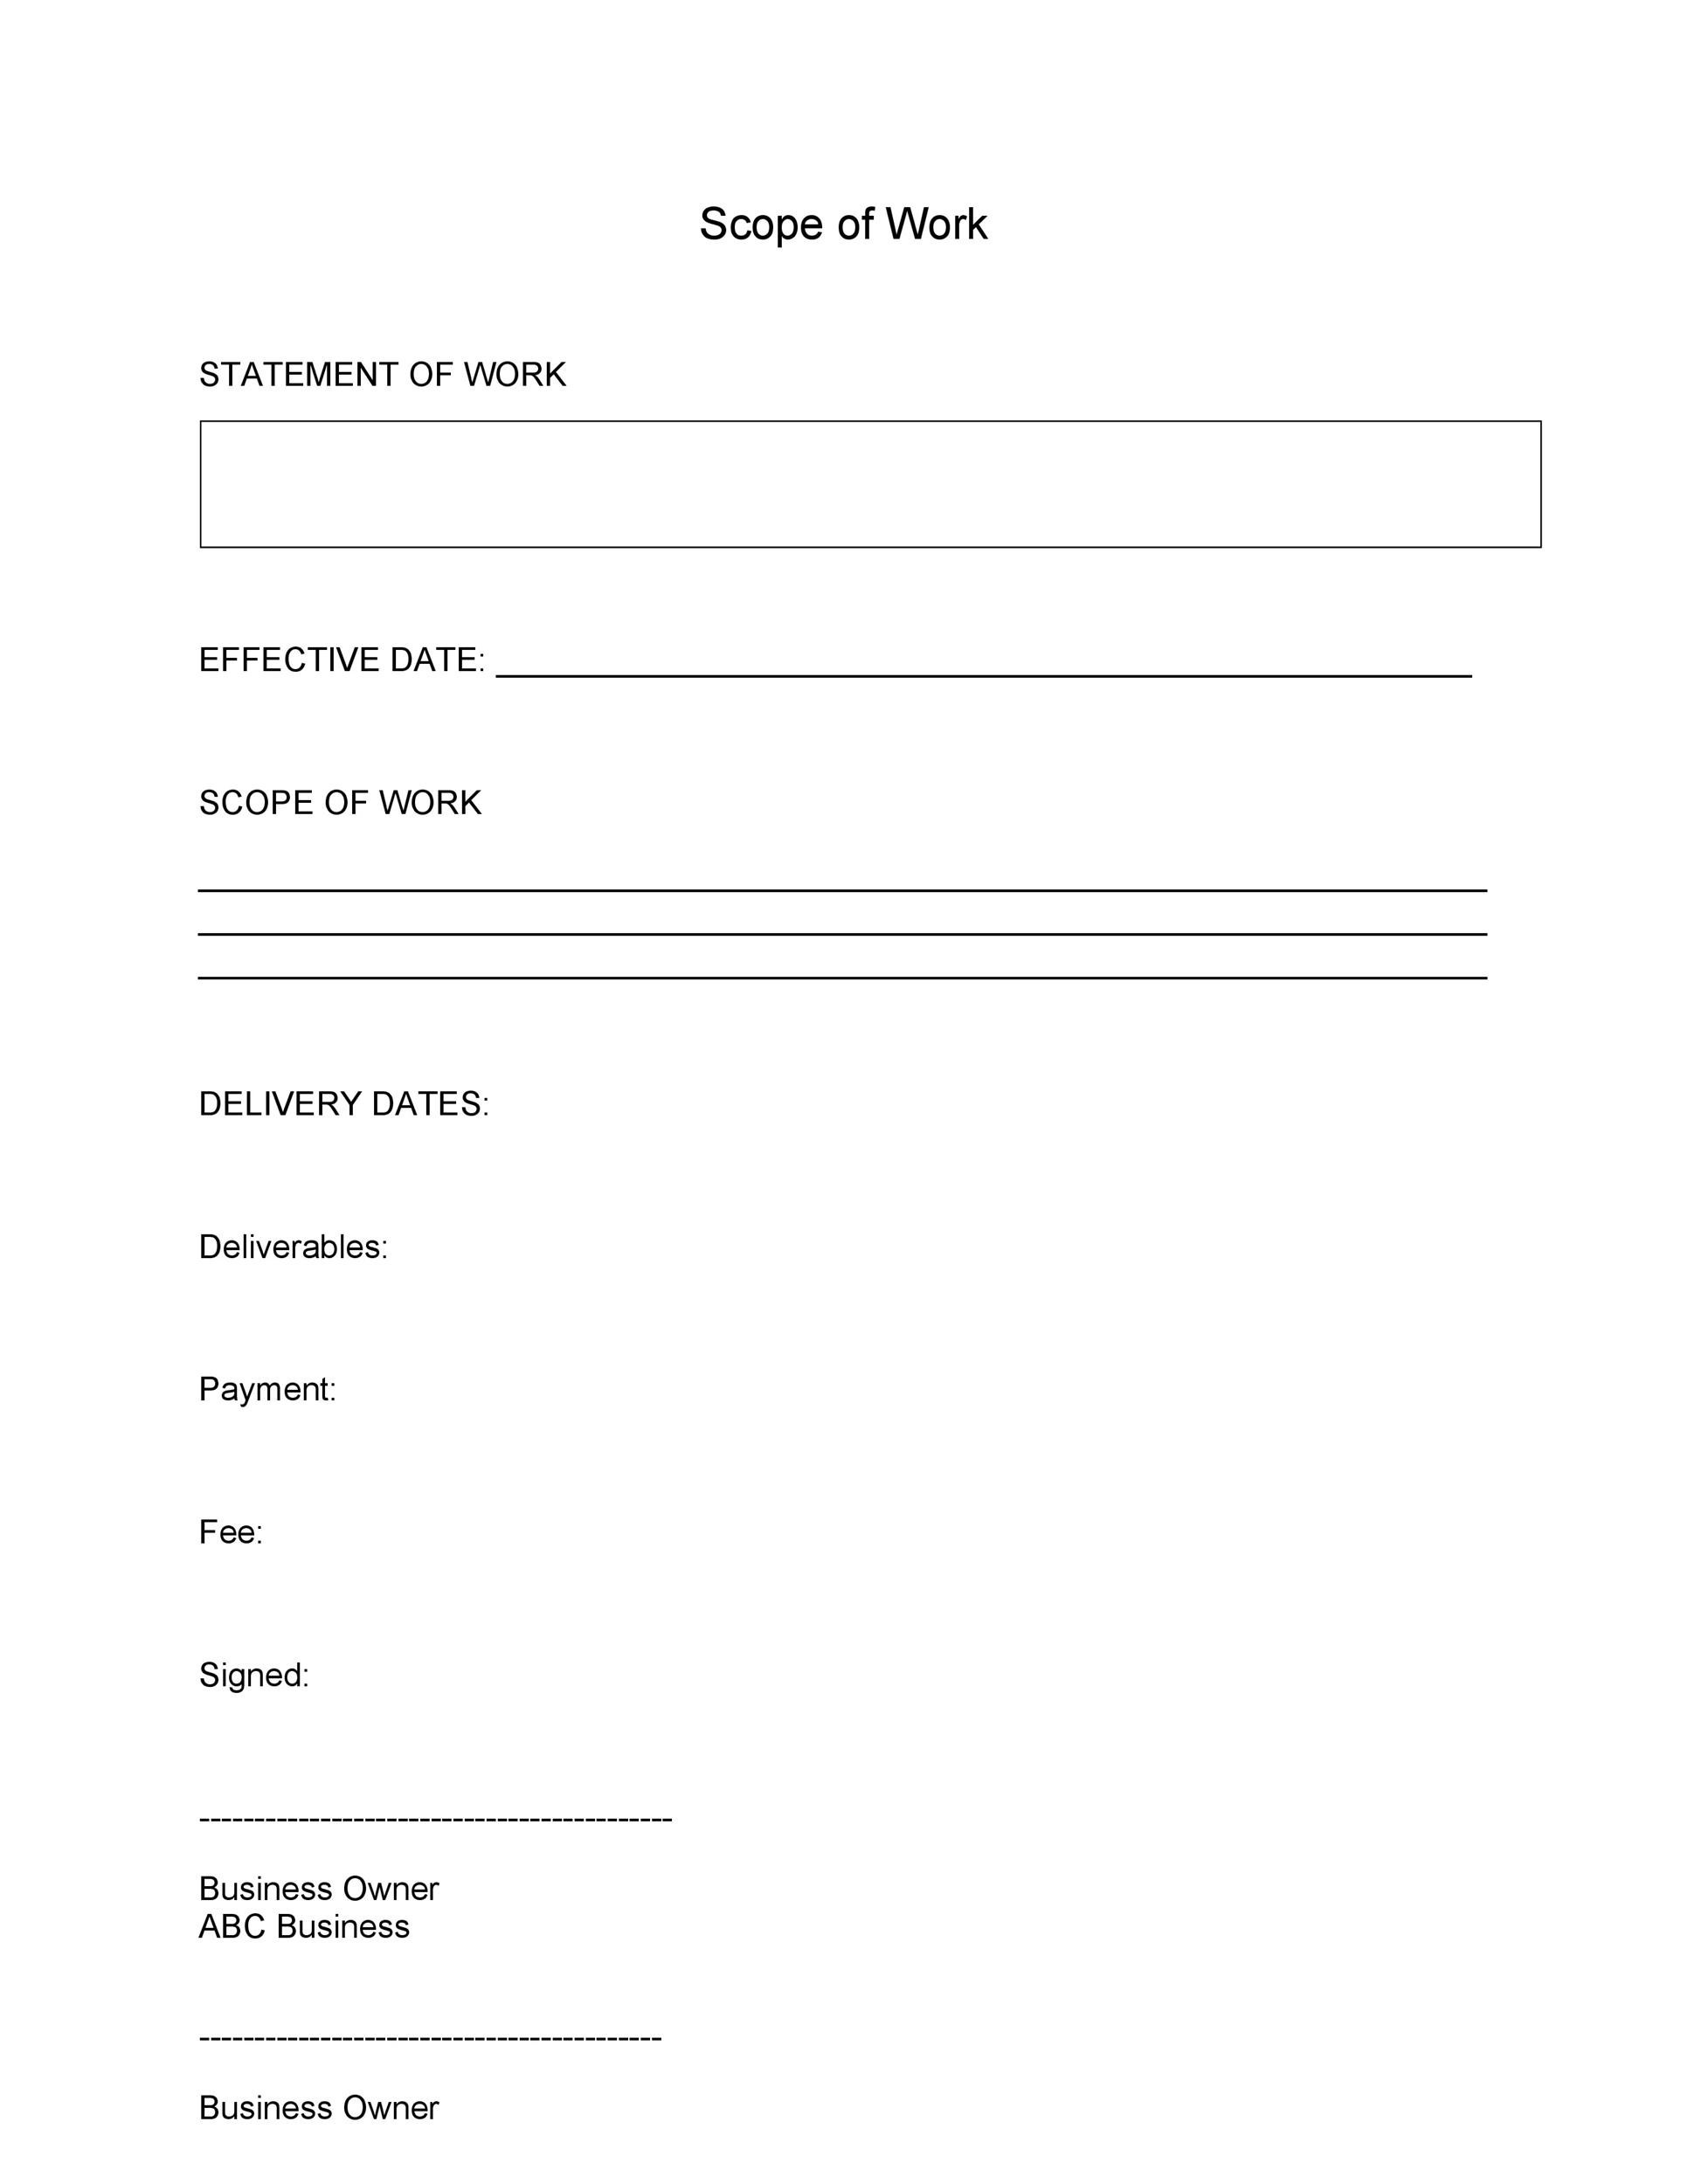 Free Scope of Work Template 03